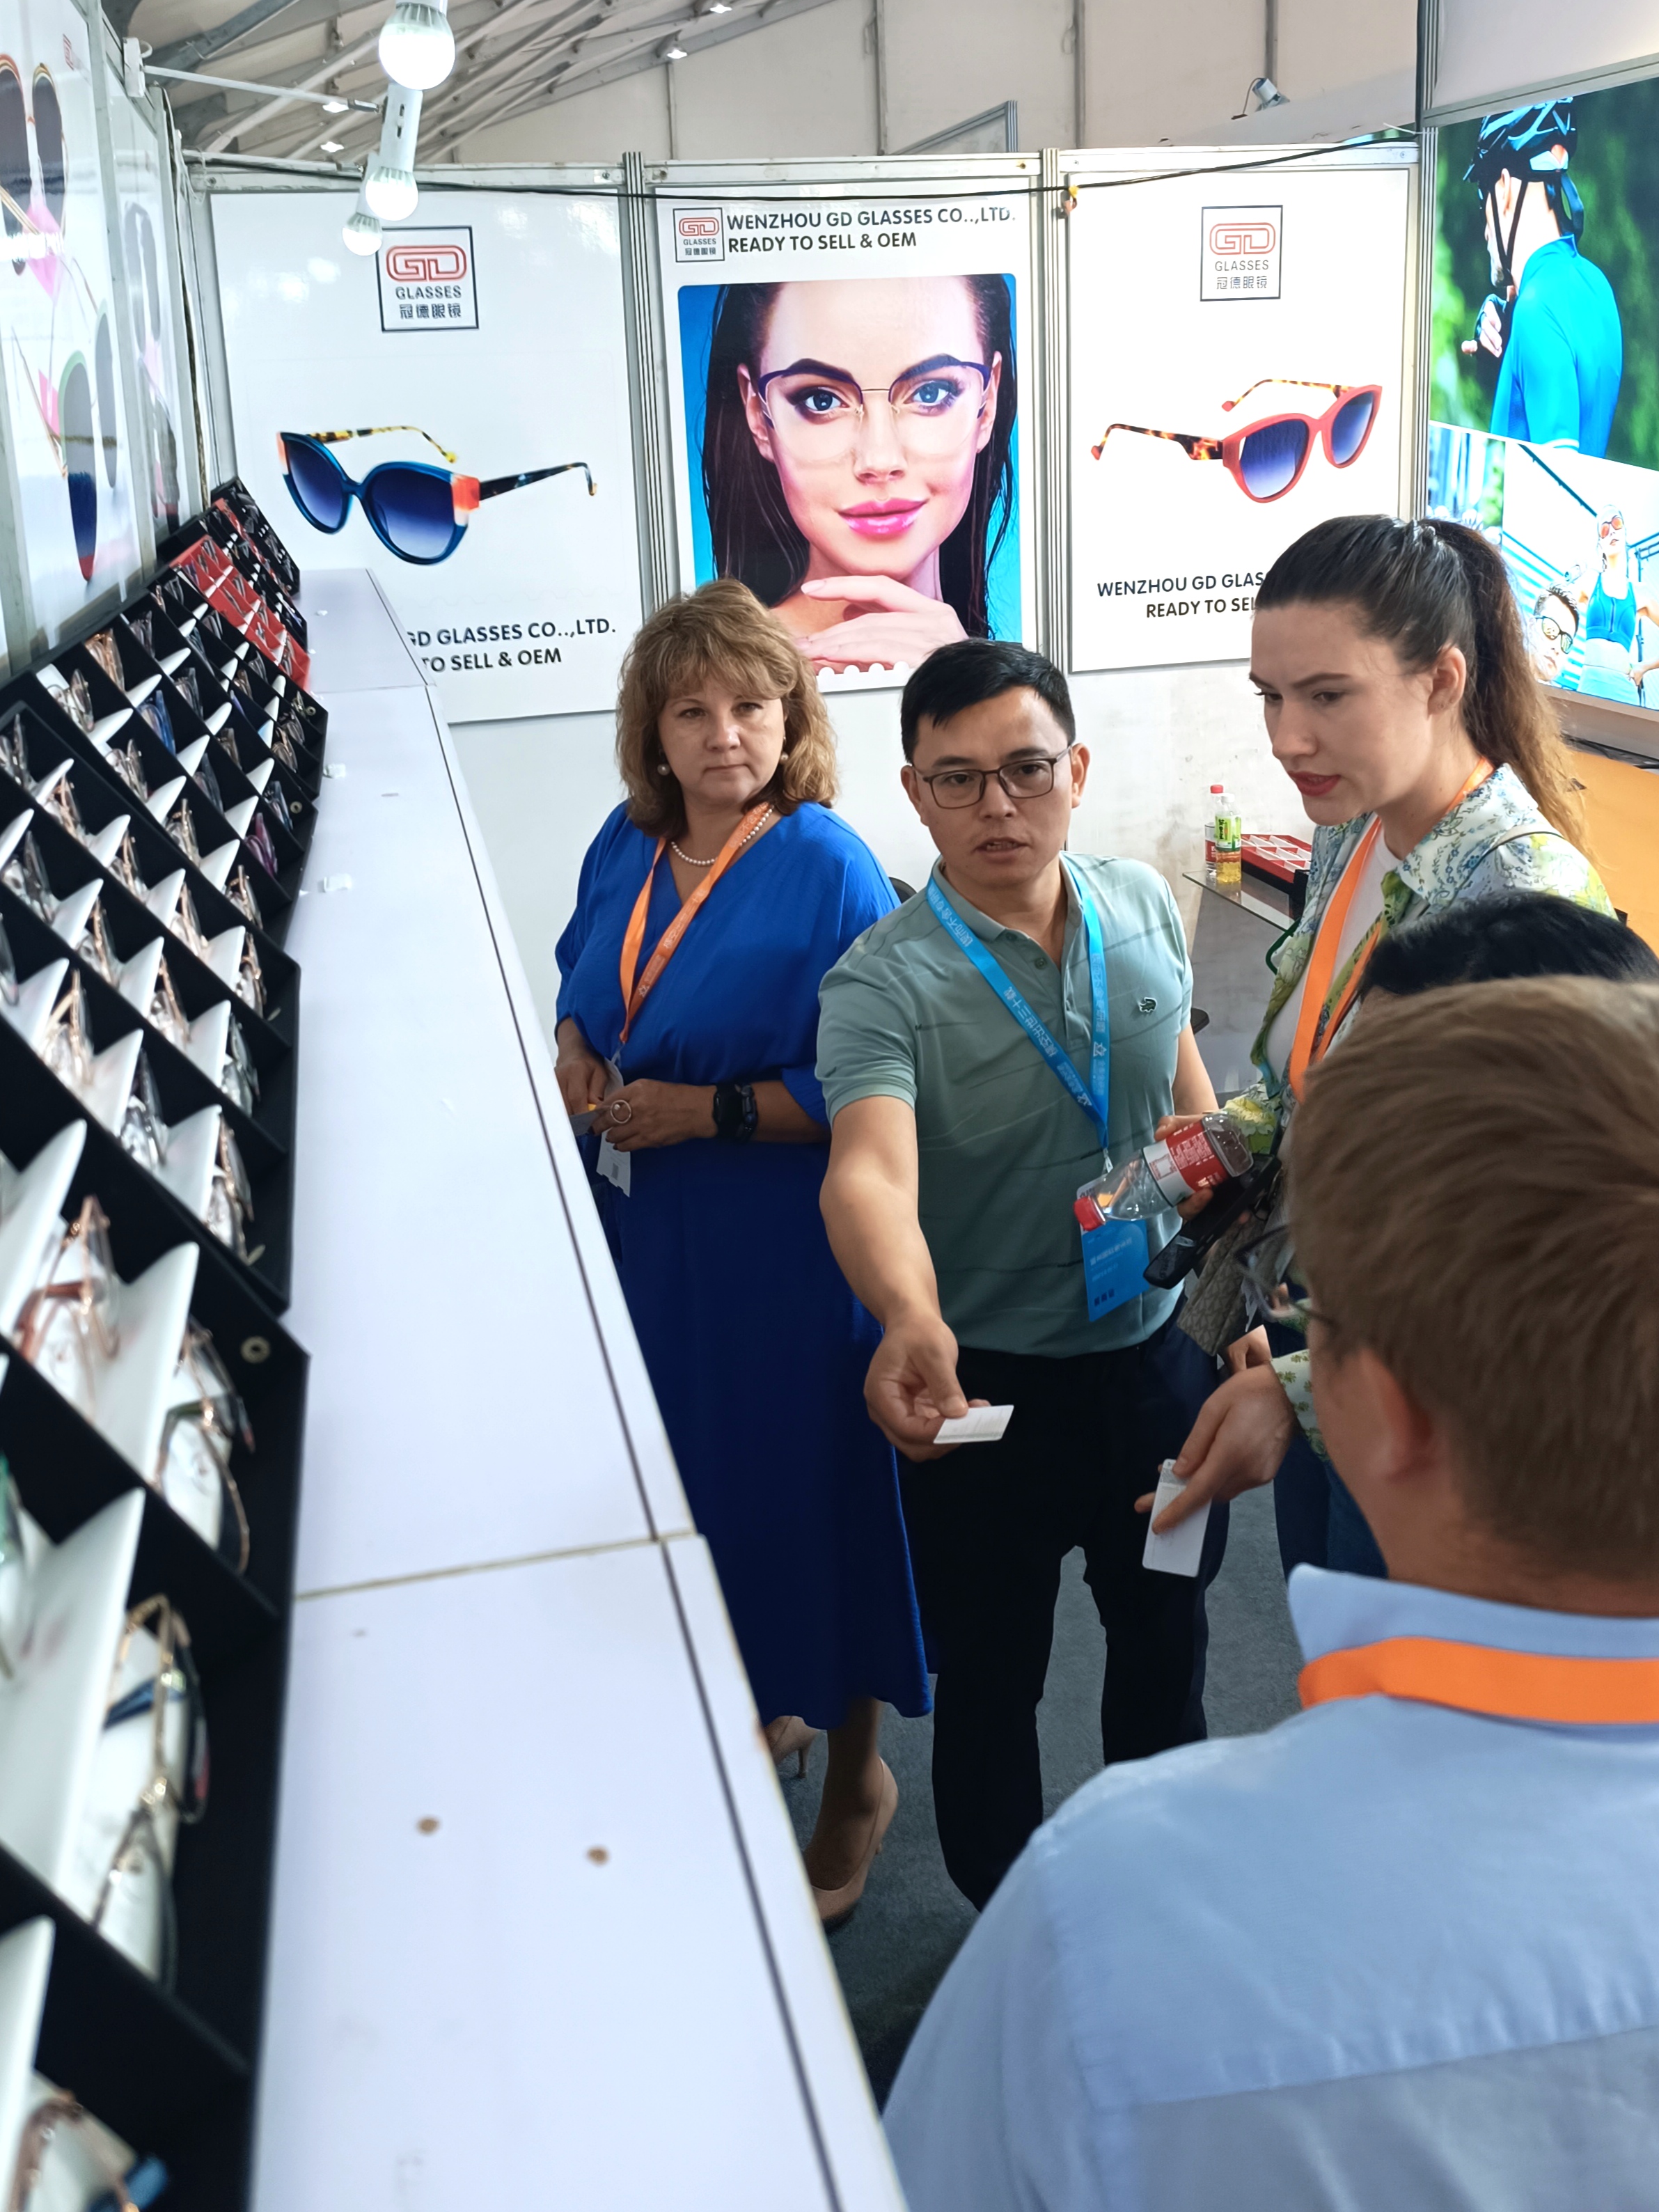 A Successful Participation in the Wenzhou Eyewear Exhibition A Bountiful Harvest for Our Company